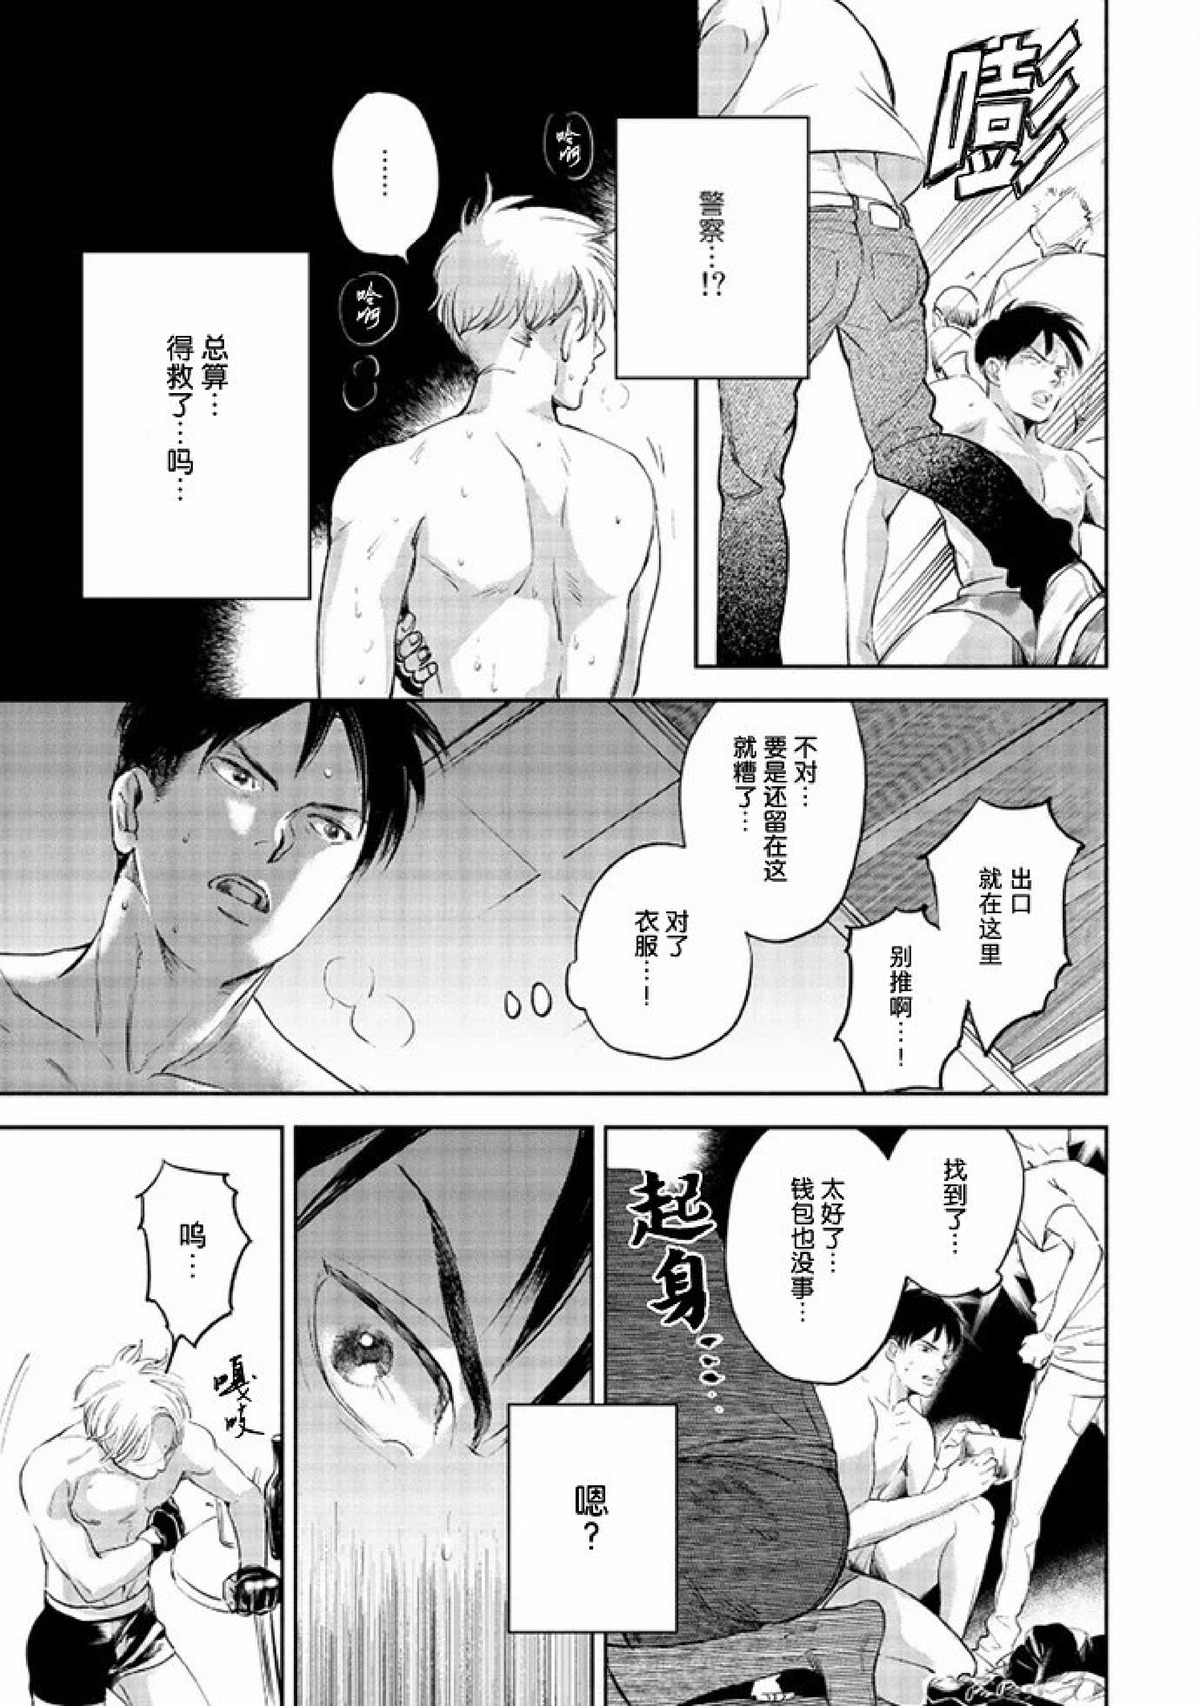 【Two sides of the same coin[腐漫]】漫画-（上卷01-02）章节漫画下拉式图片-67.jpg